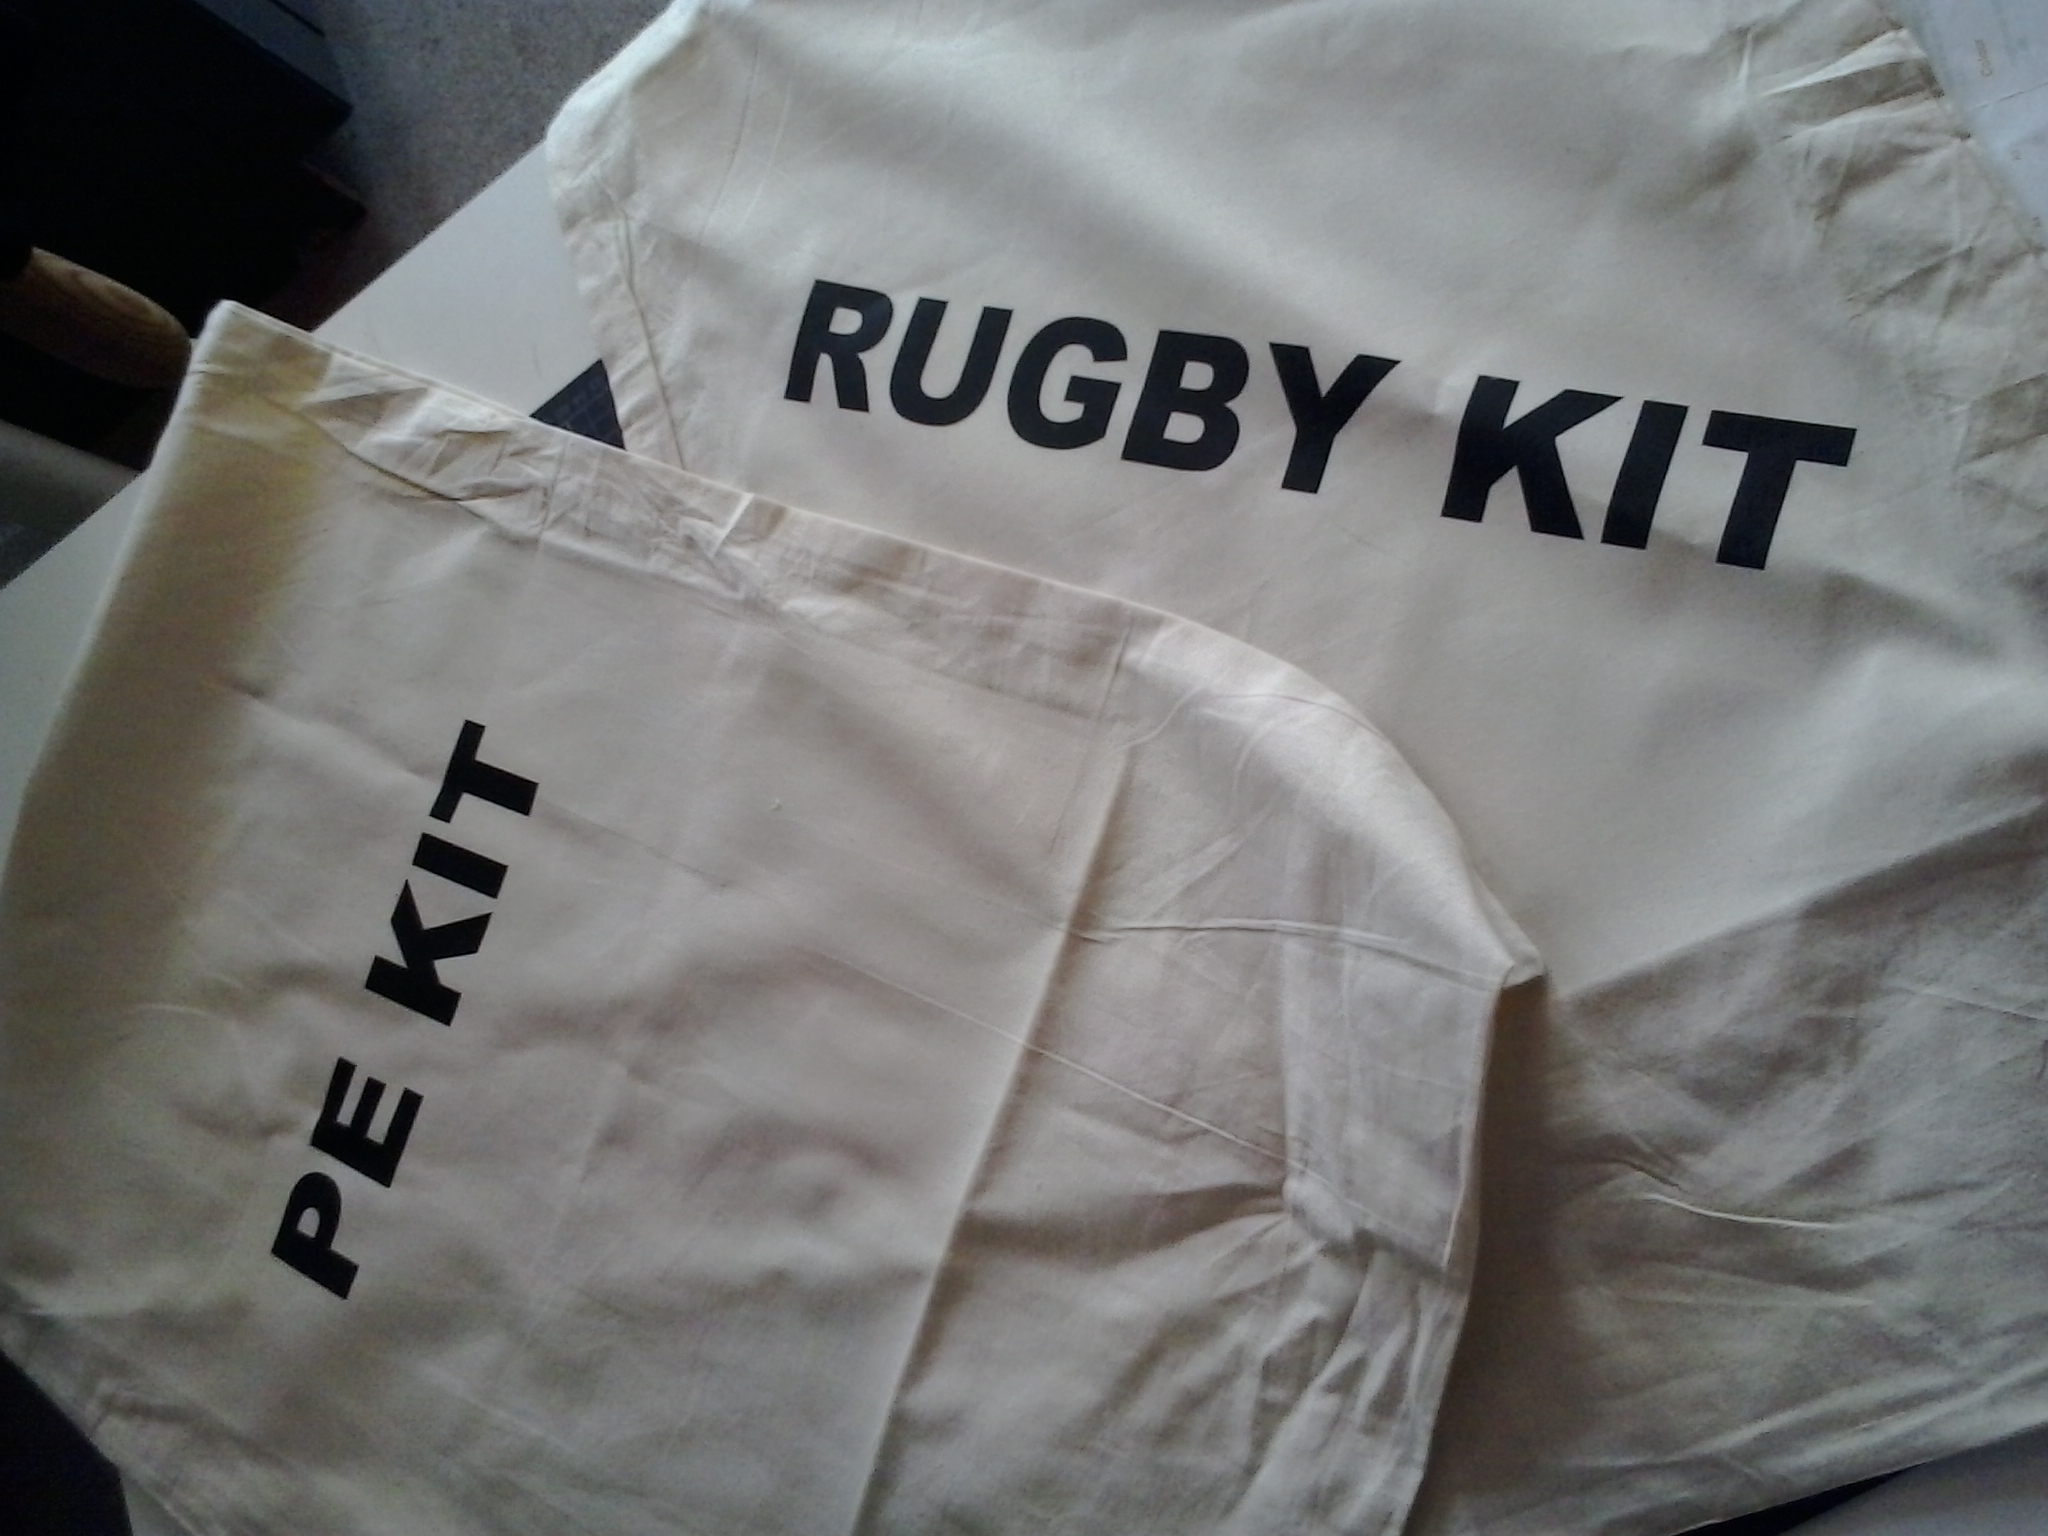 PE Kit Prints From The Print Centre